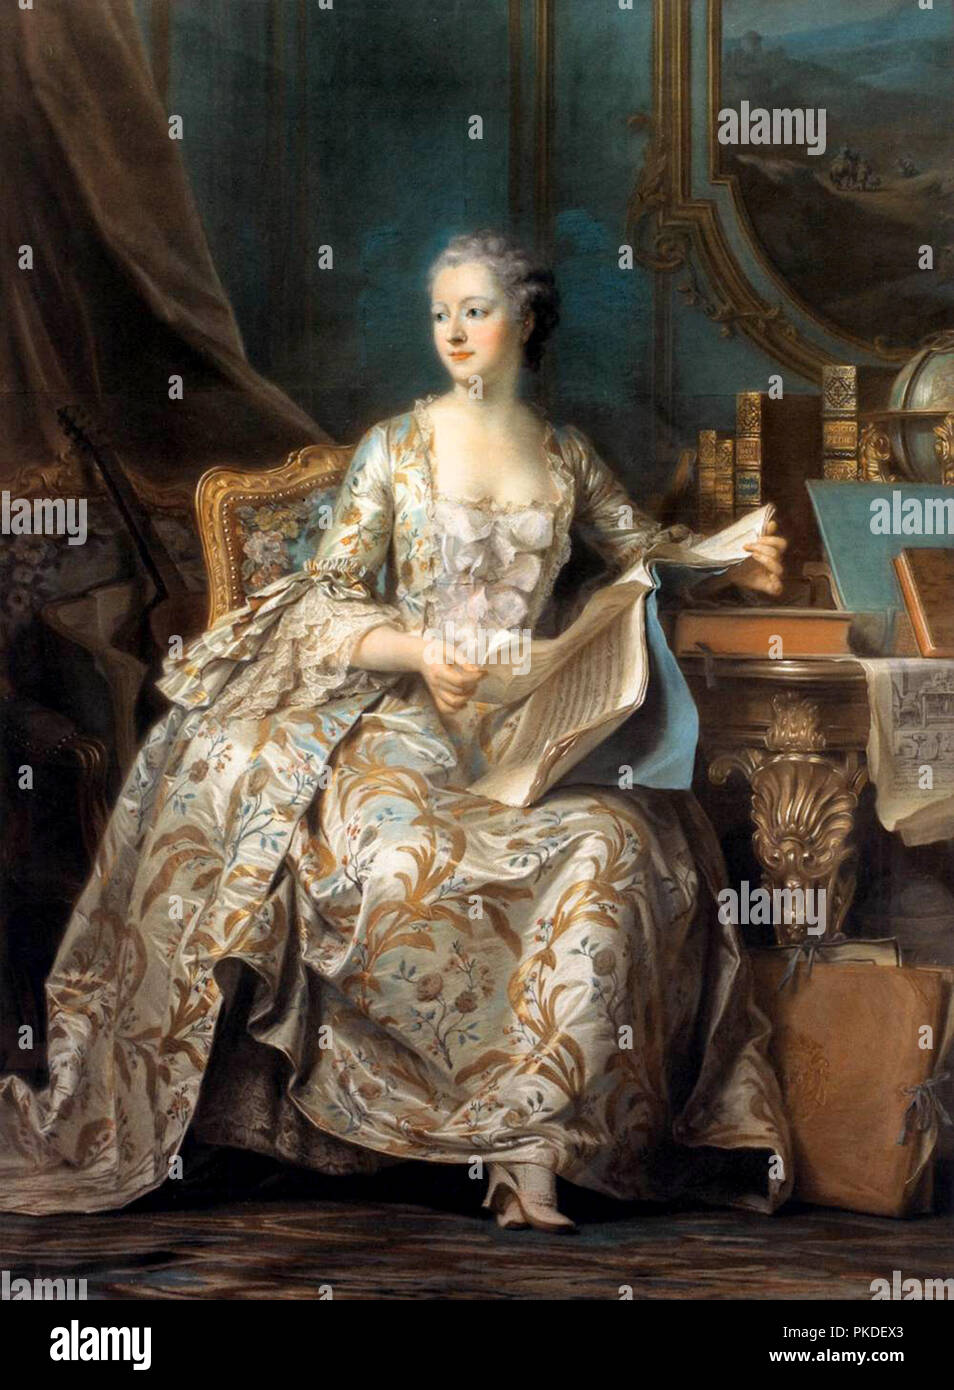 Marquise de Pompadour, Jeanne Antoinette Poisson, Marquise de Pompadour (1721 – 1764), Madame de Pompadour, member of the French court and the official chief mistress of Louis XV from 1745 to 1751, Stock Photo